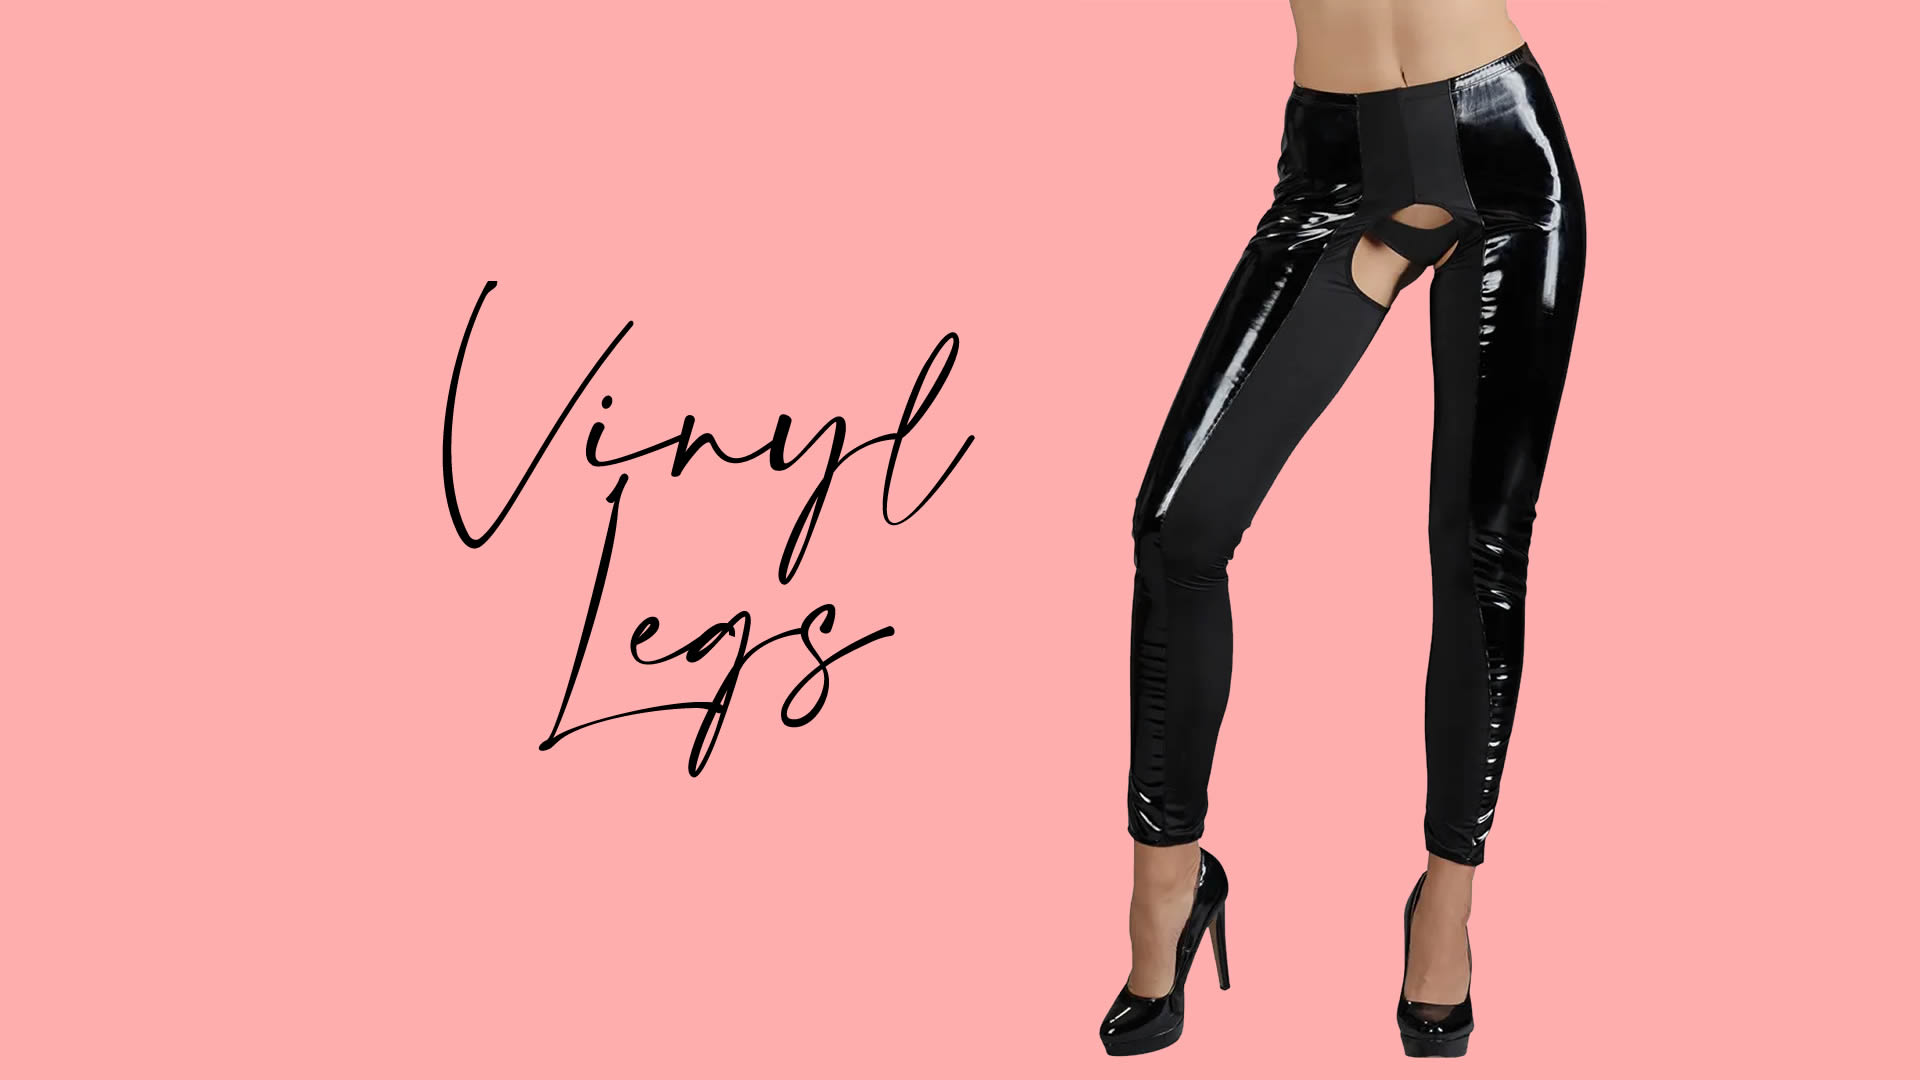 Vinyl Leggings with Stretch that Crotchless